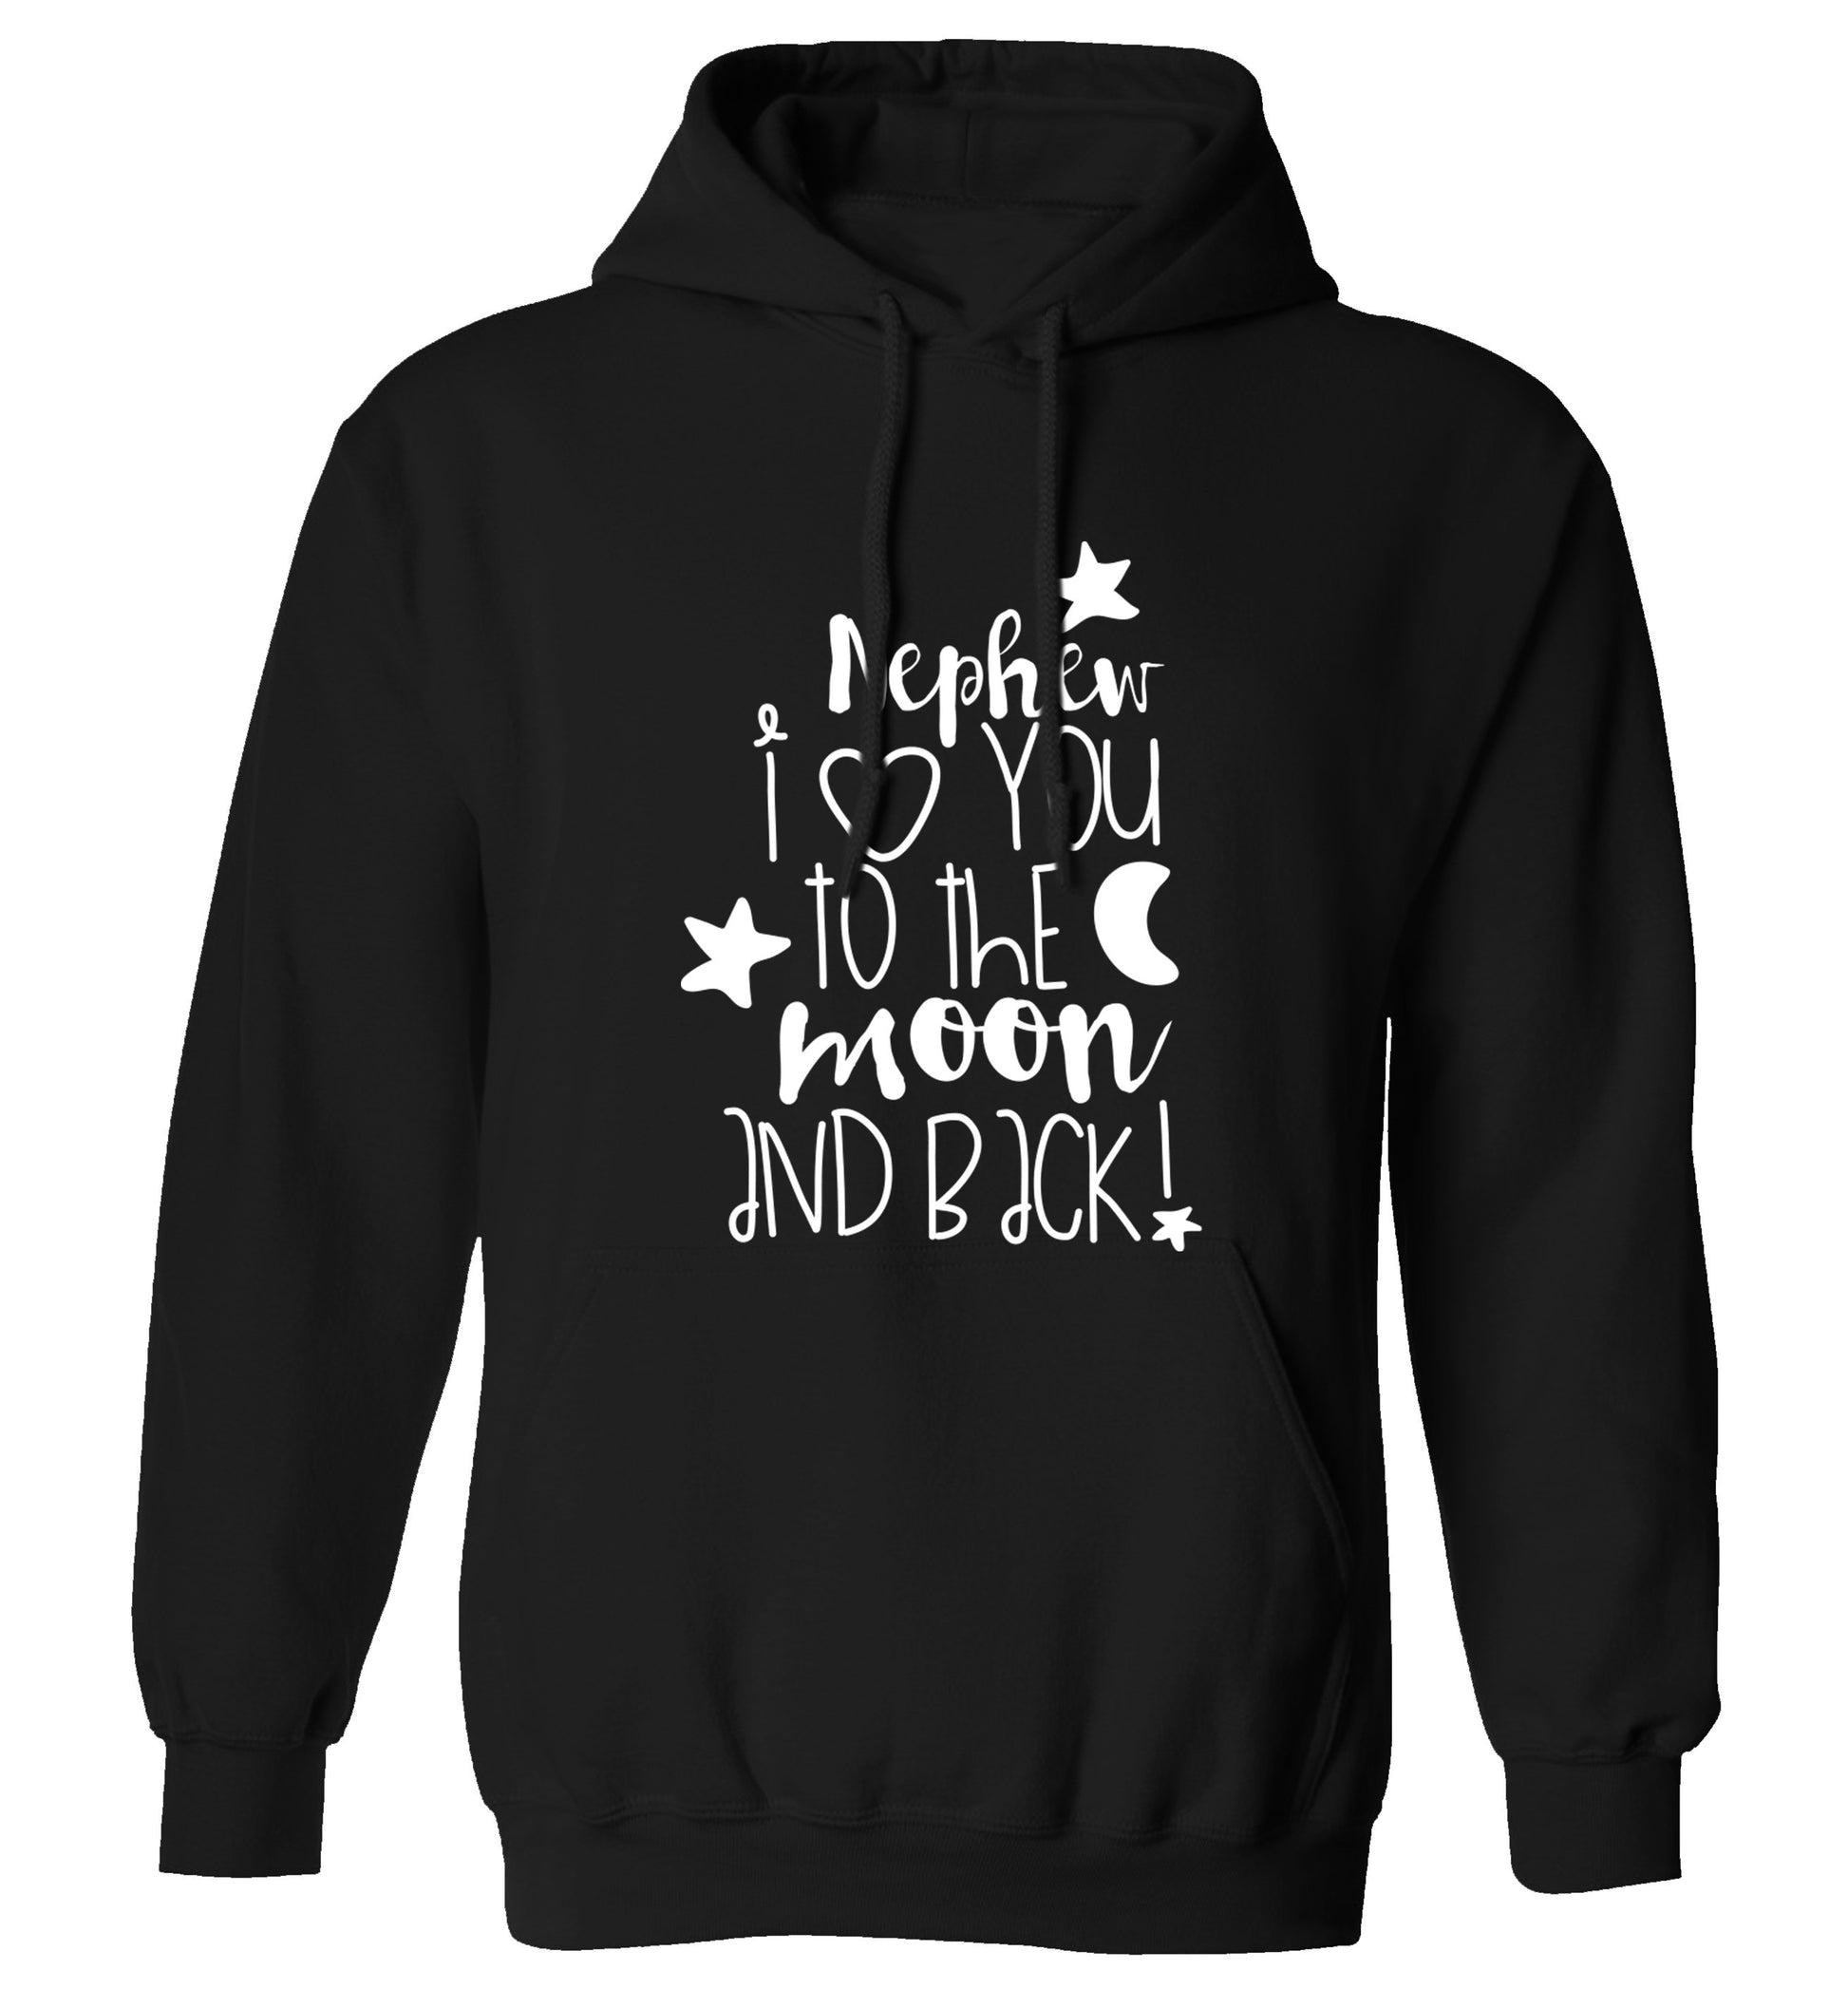 Nephew I love you to the moon and back adults unisex black hoodie 2XL